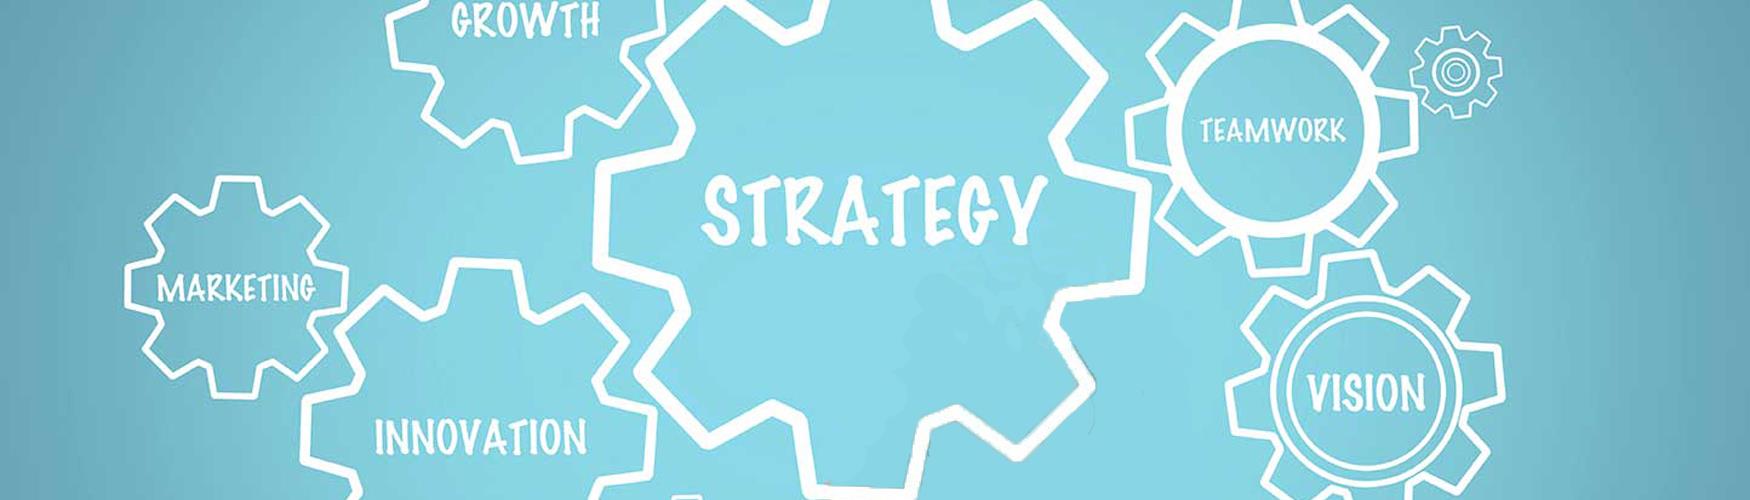 Research & Strategy